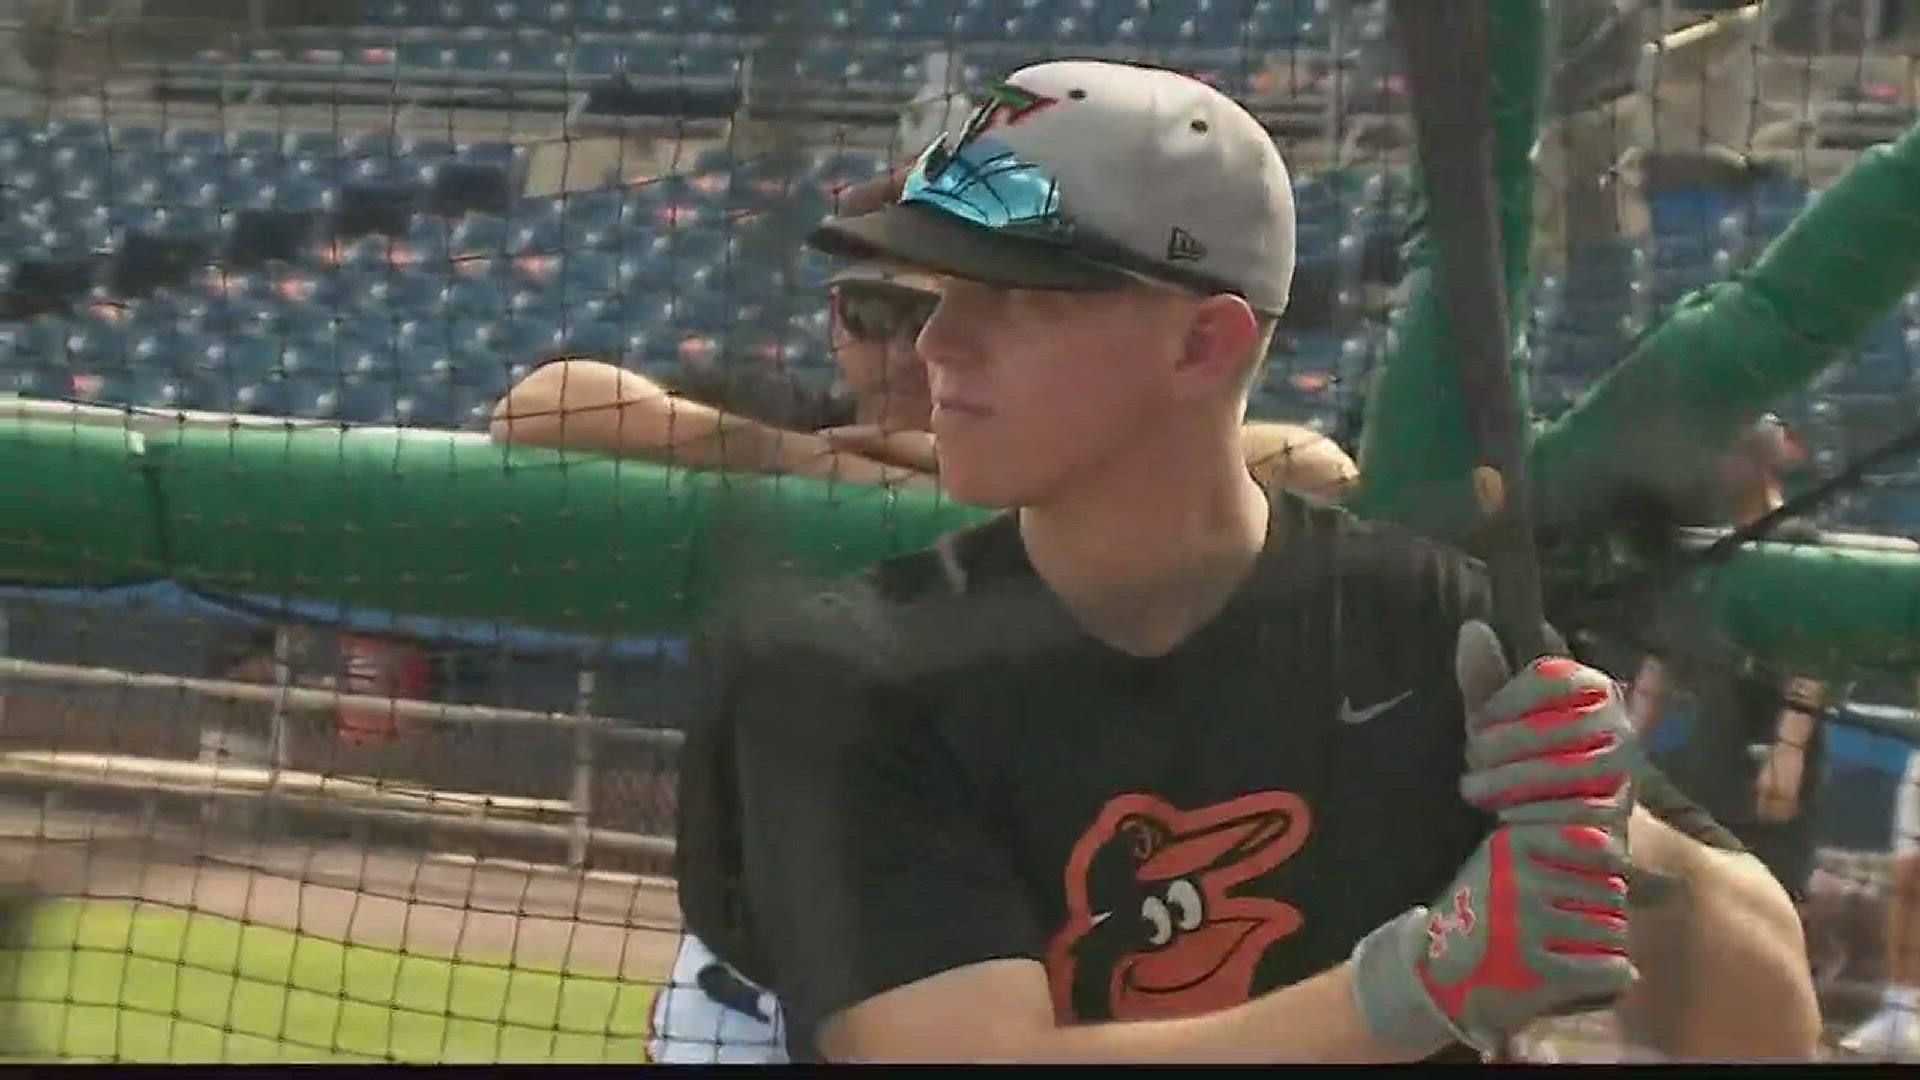 The Tides catcher is the number one prospect in the Orioles system. He's been playing up to expectations this season.